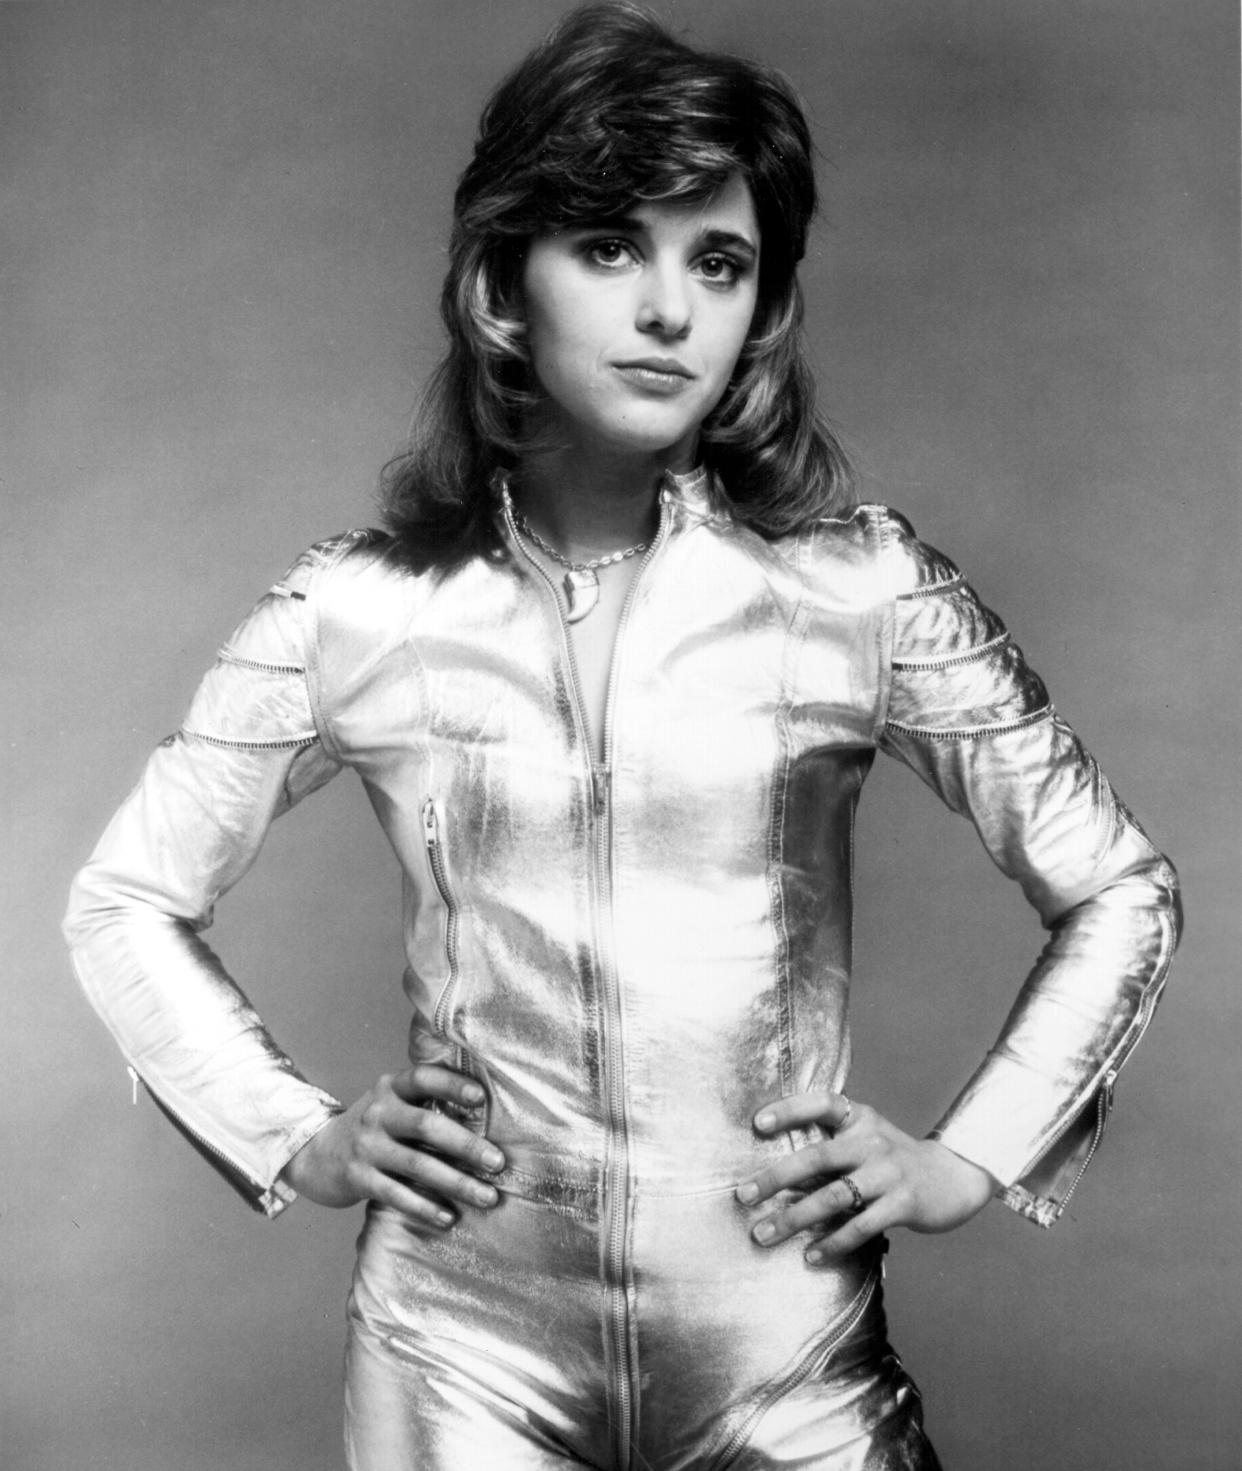 Suzi Quatro in the early 1970s. (Photo: Michael Ochs Archives/Getty Images)